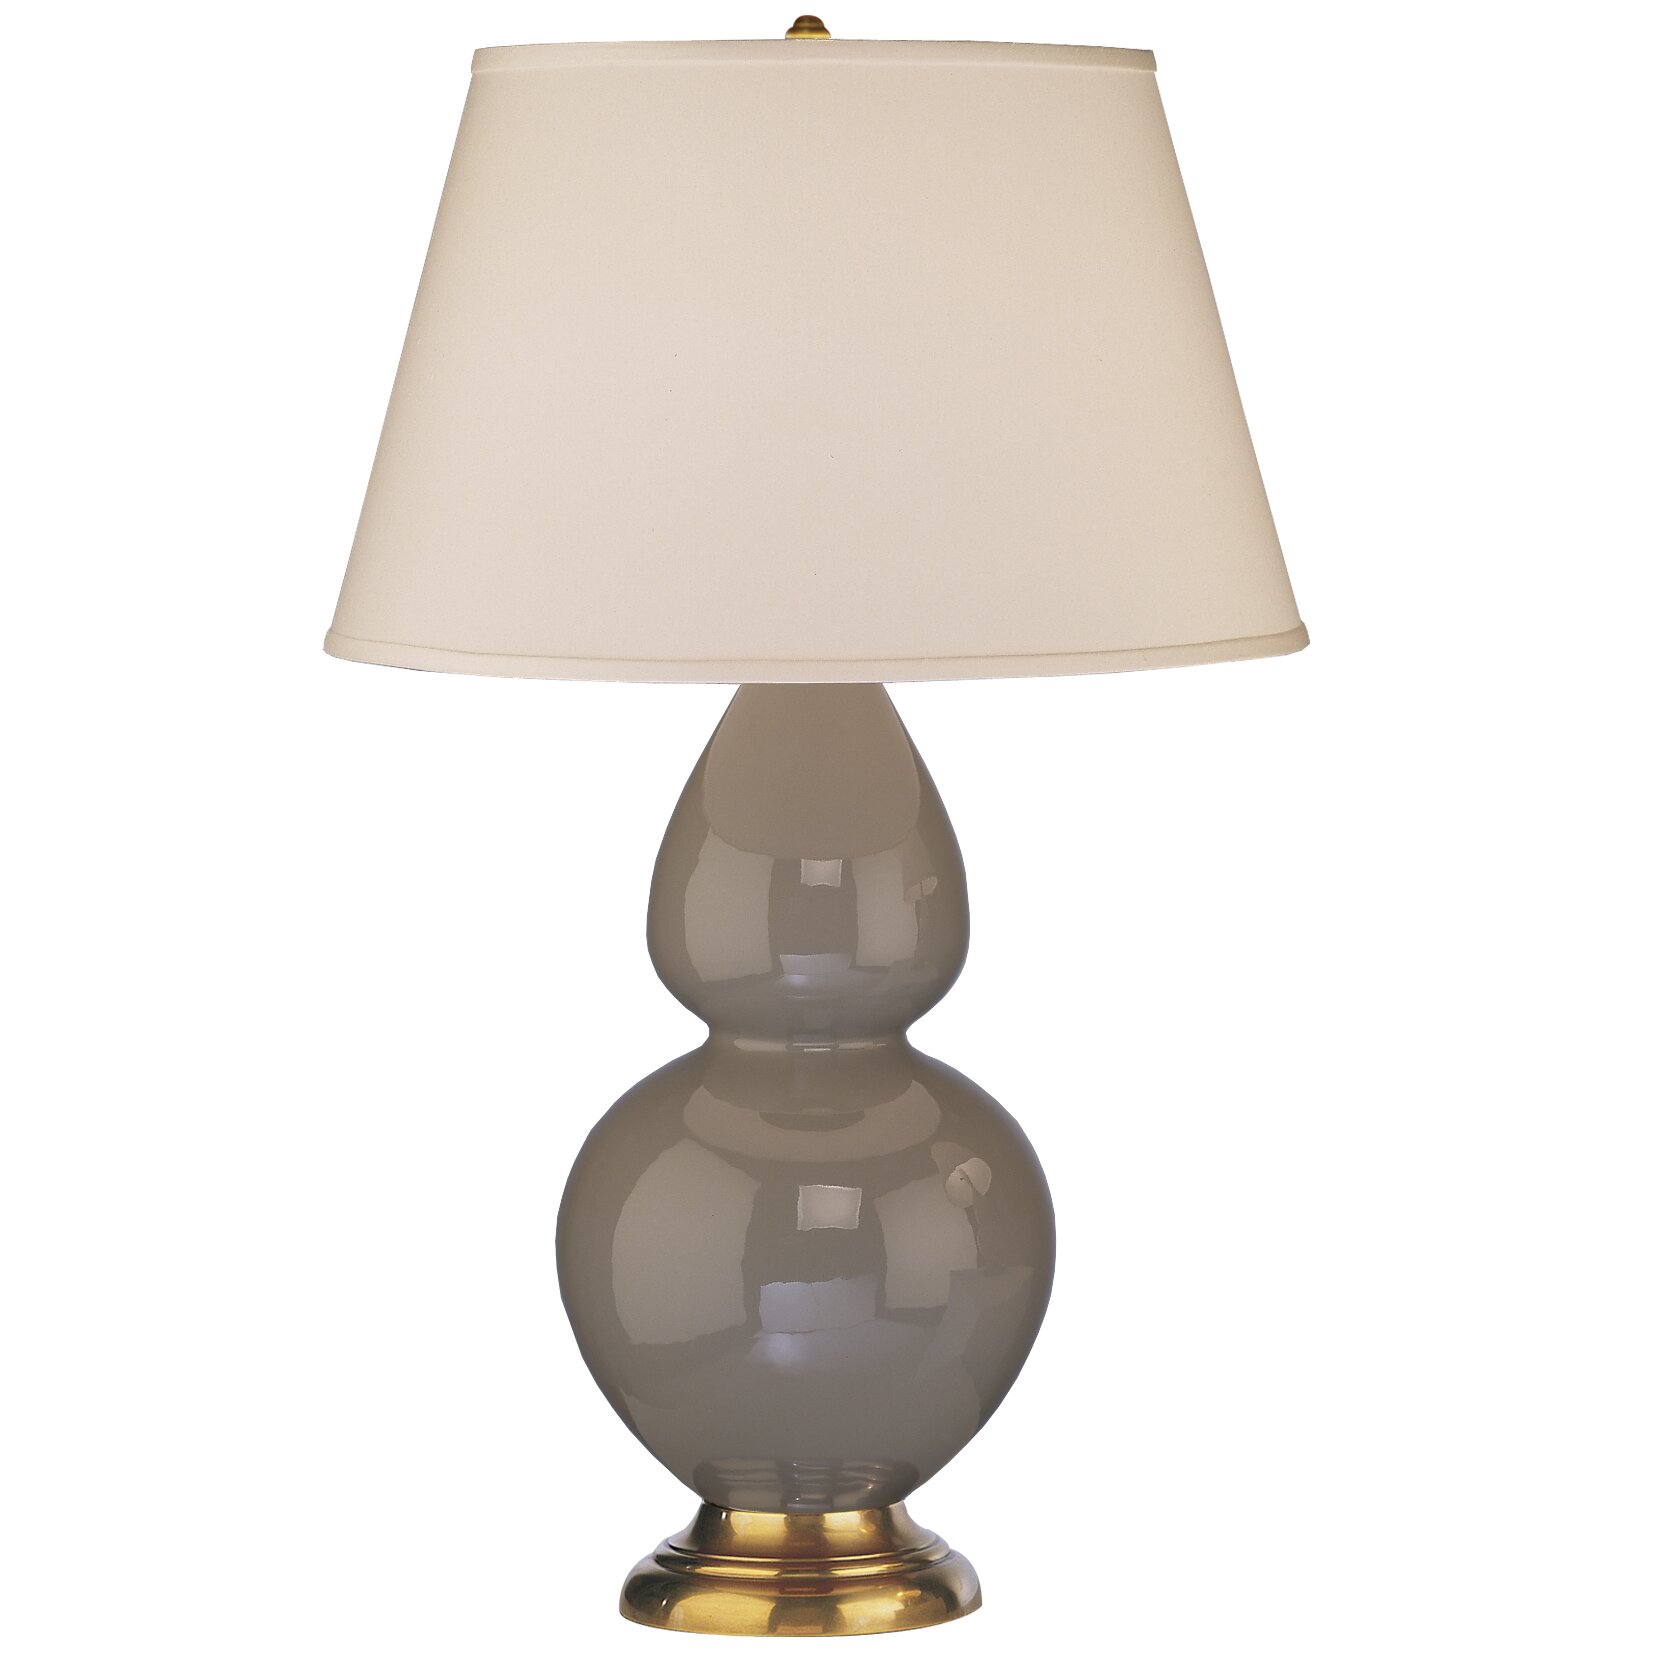 double light table lamp